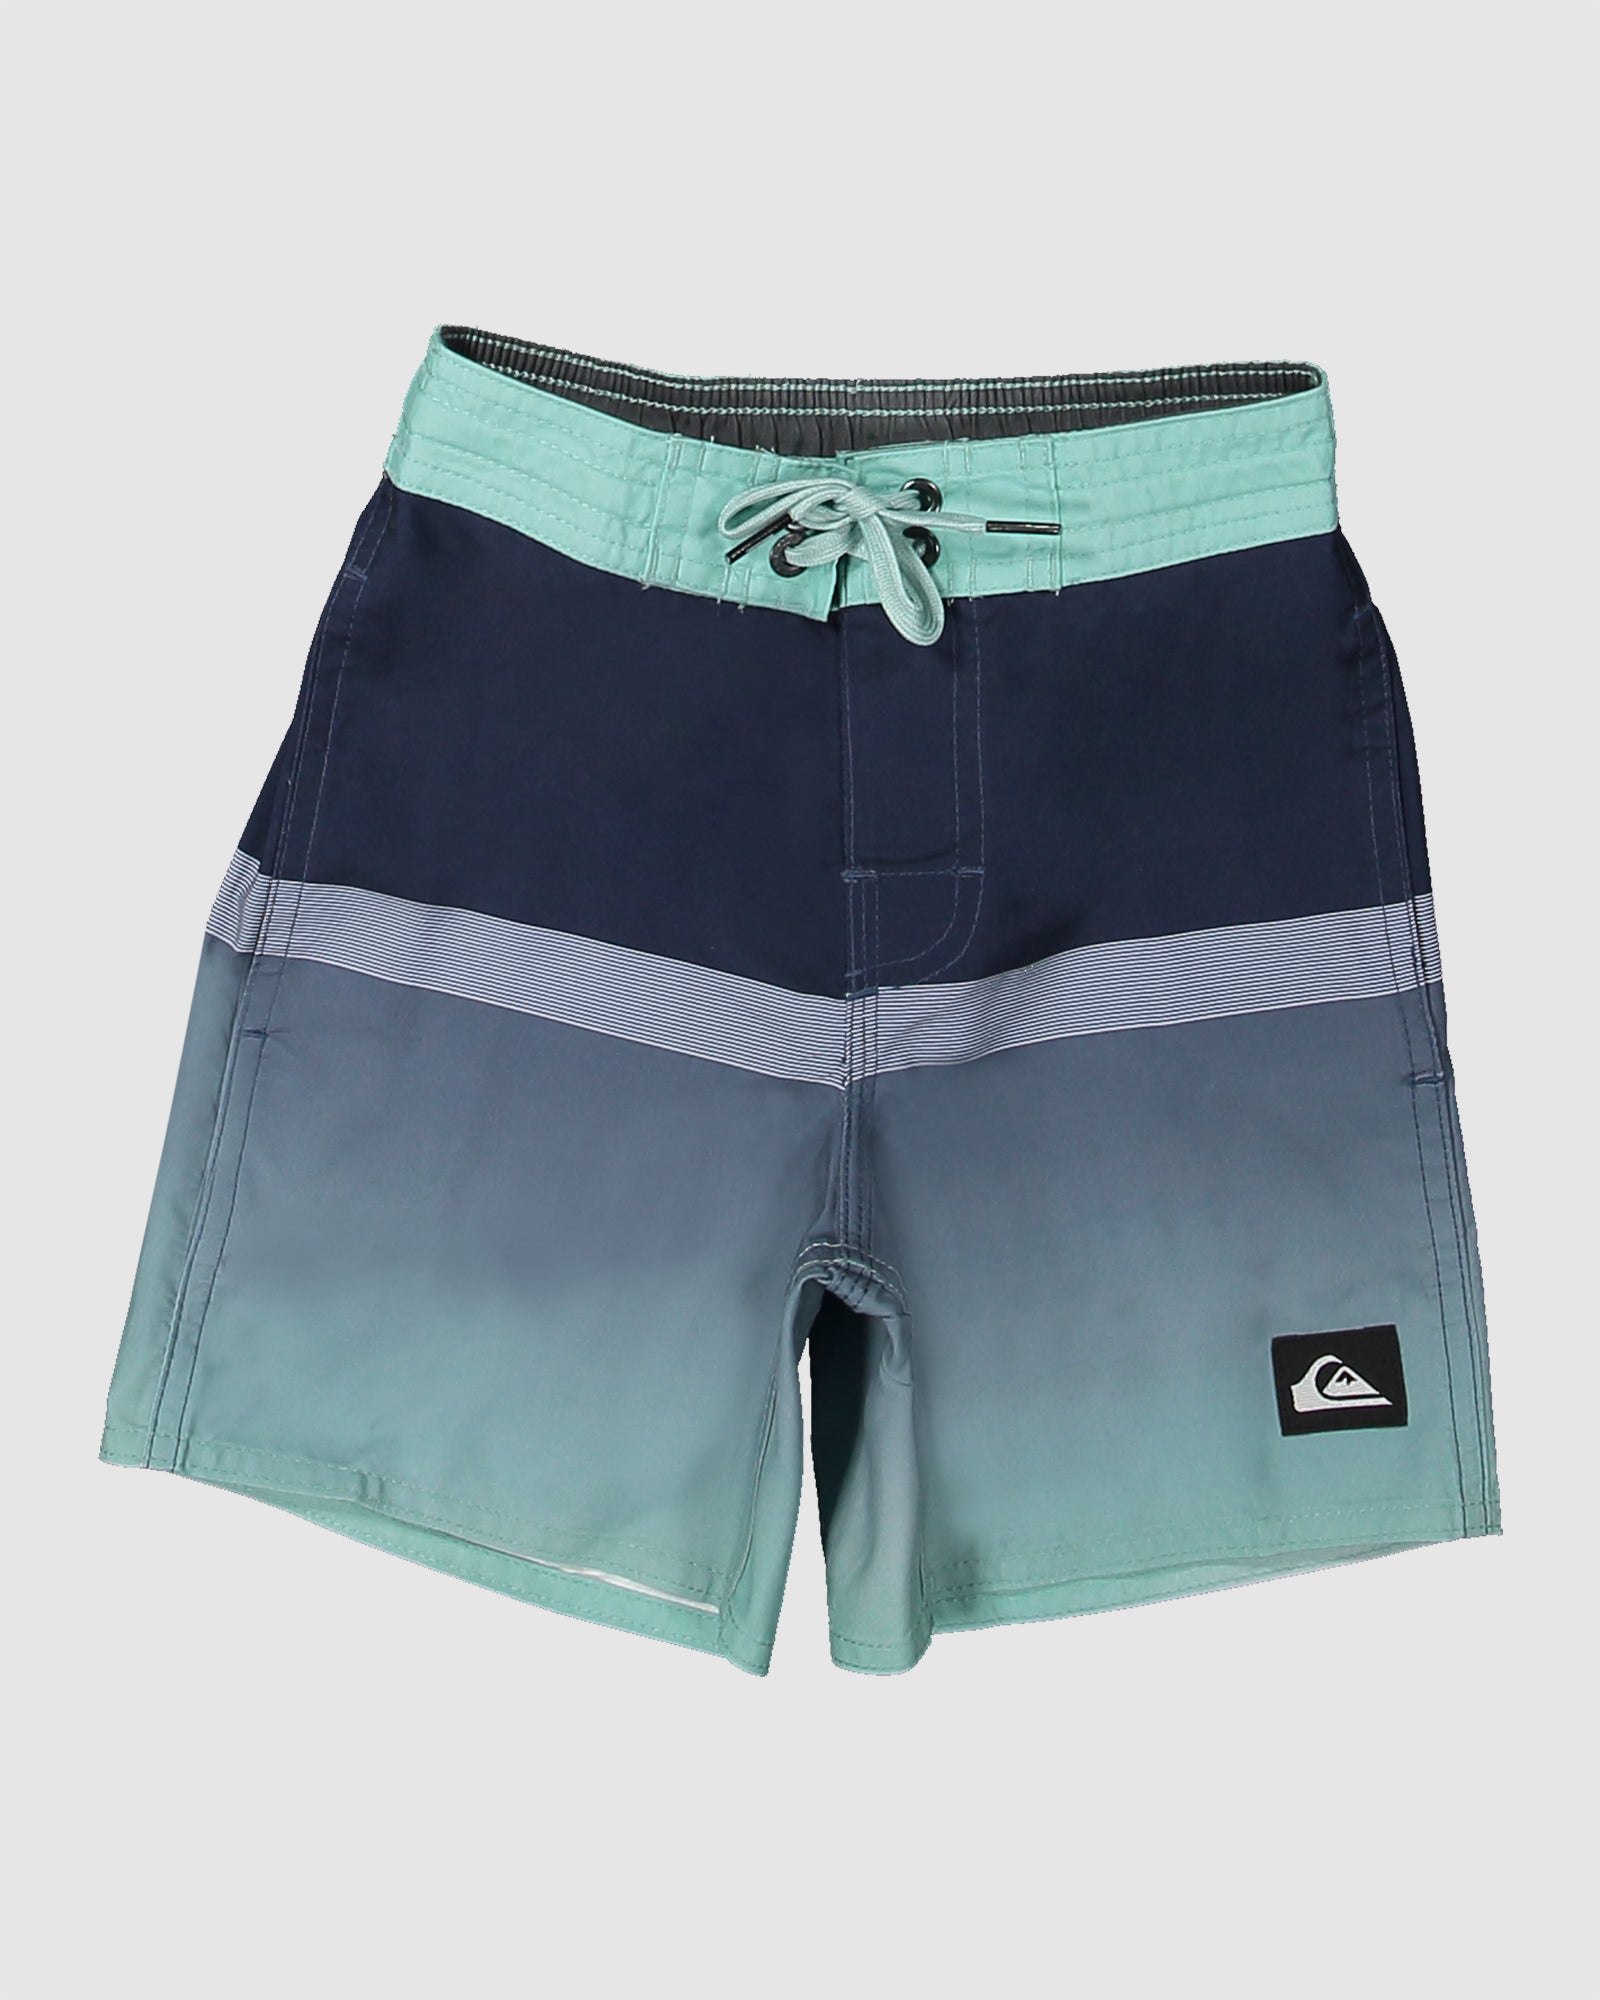 Quiksilver Division Beachshort Youth 16 - Naval Accademy